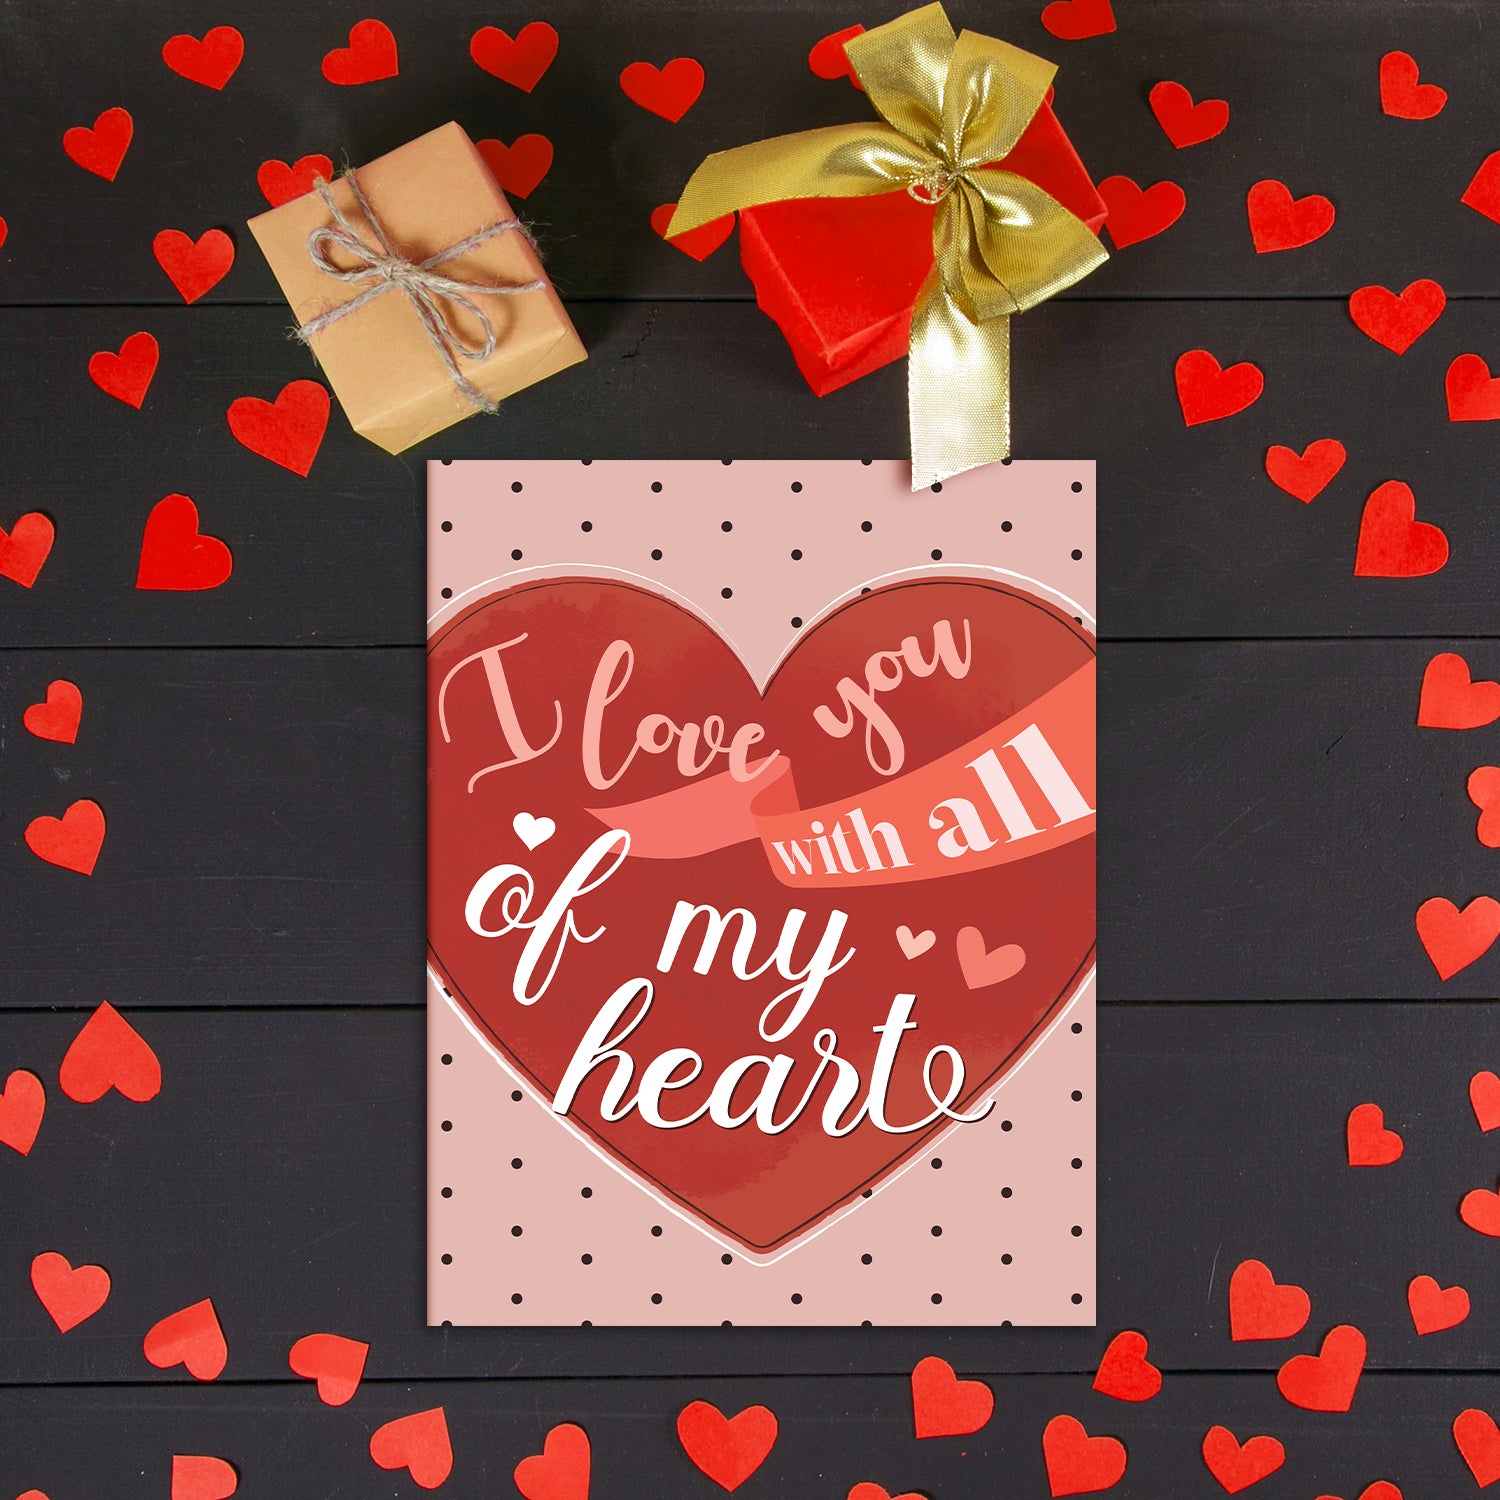 "I Love You with All of My Heart" Big Valentine's Day Greeting Cards and Envelopes – 8.5" x 11" Large Jumbo Size Valentines Card – 2 per Pack